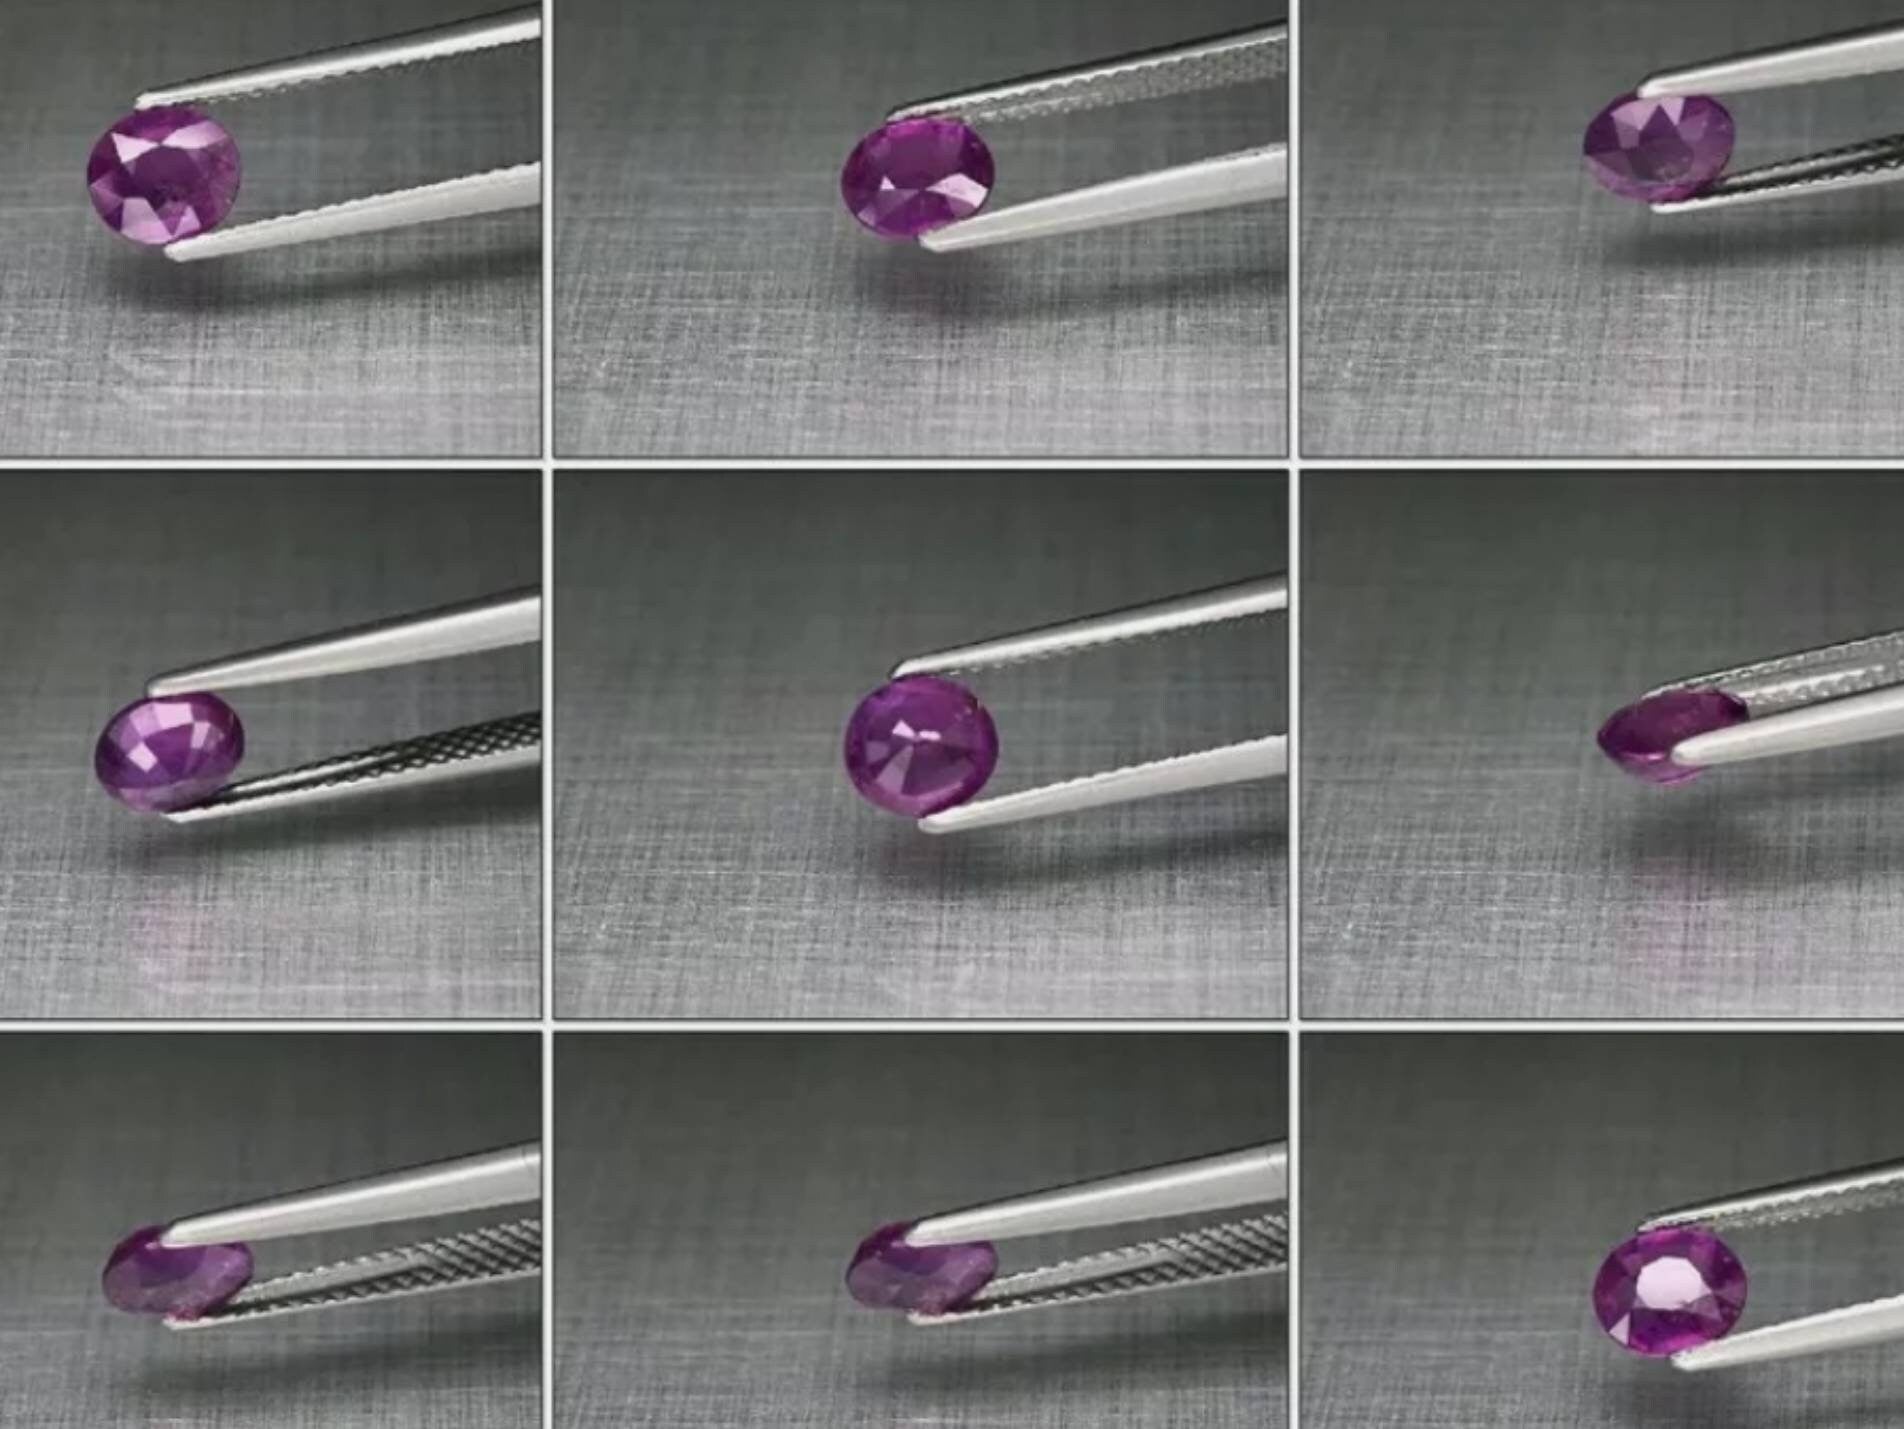 0.78ct UNHEATED Purple Sapphire 5.7x5mm Oval Faceted Sapphire Tanga Tanzania Natural Pink Sapphire Cut Stone Loose Gemstones